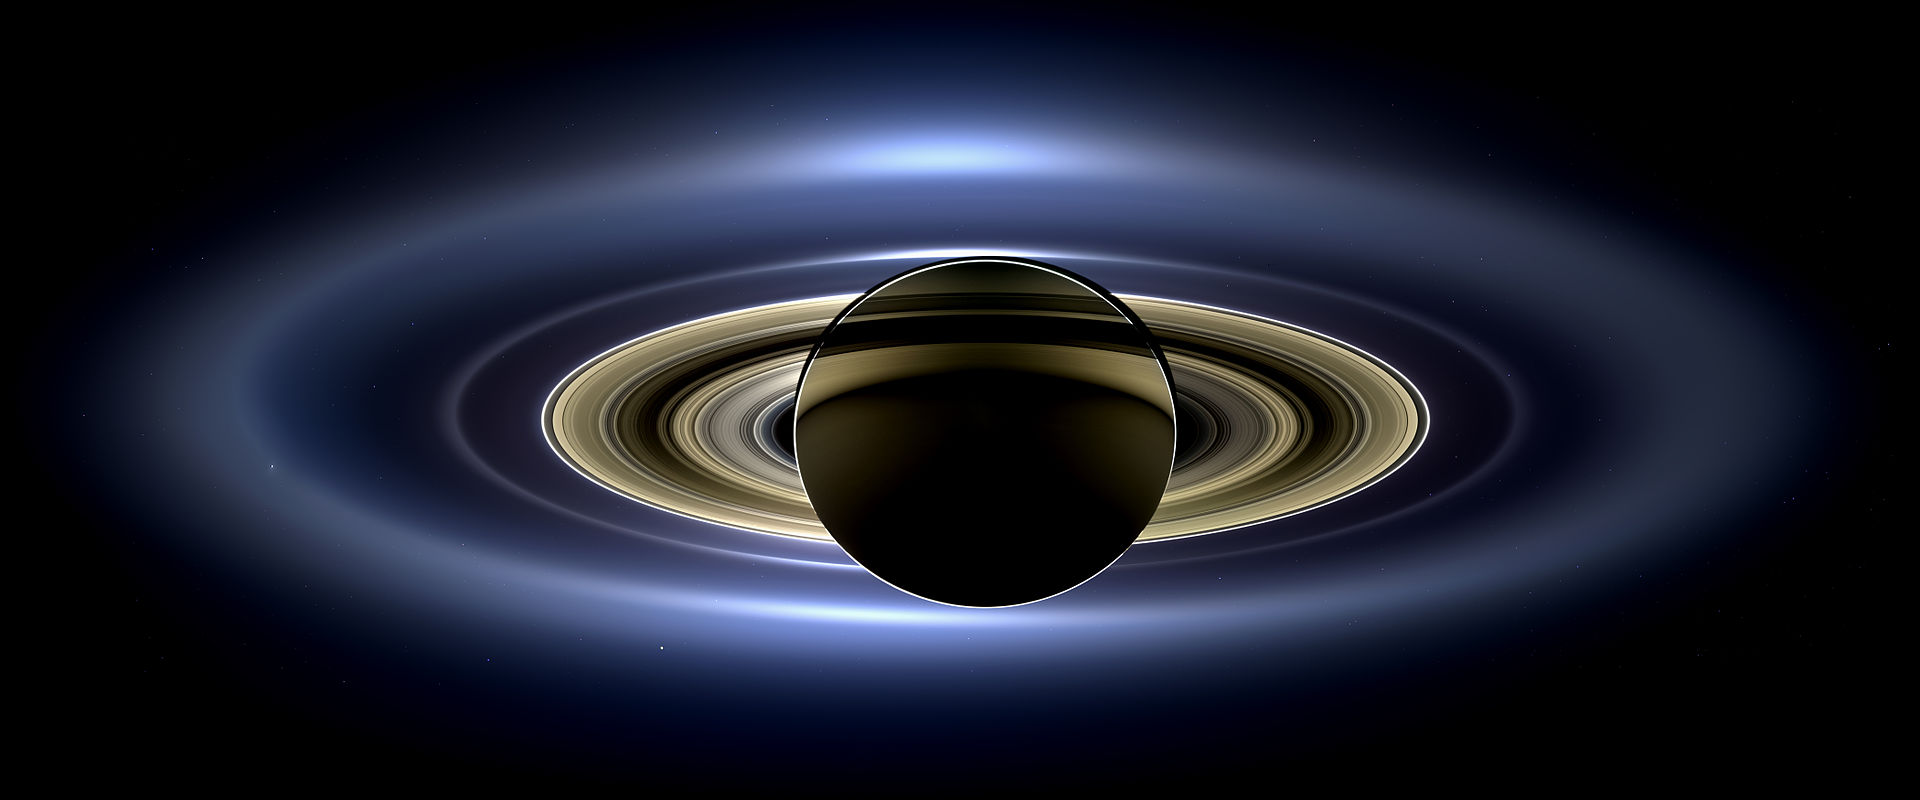 Saturn facts: How many moons does the planet have? | The Sun